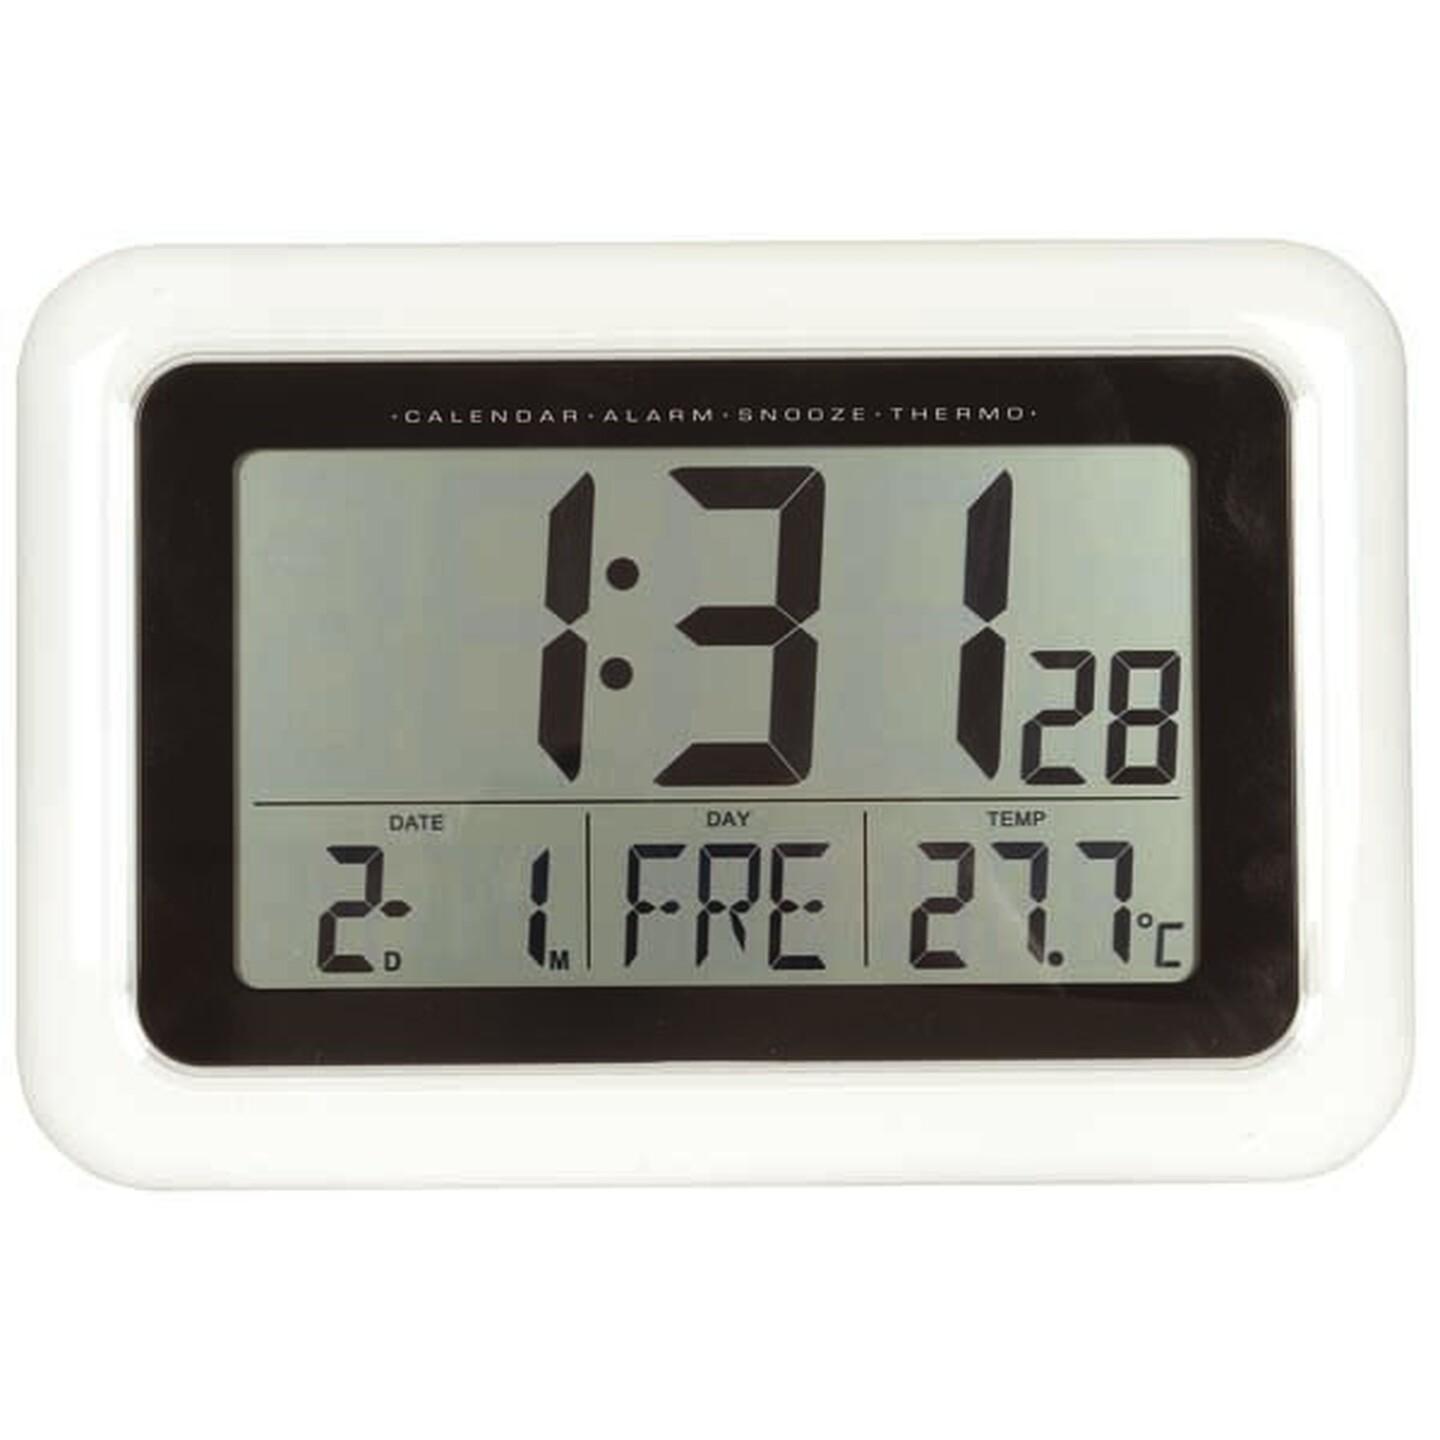 LCD Alarm Clocks with Temperature and Calendar